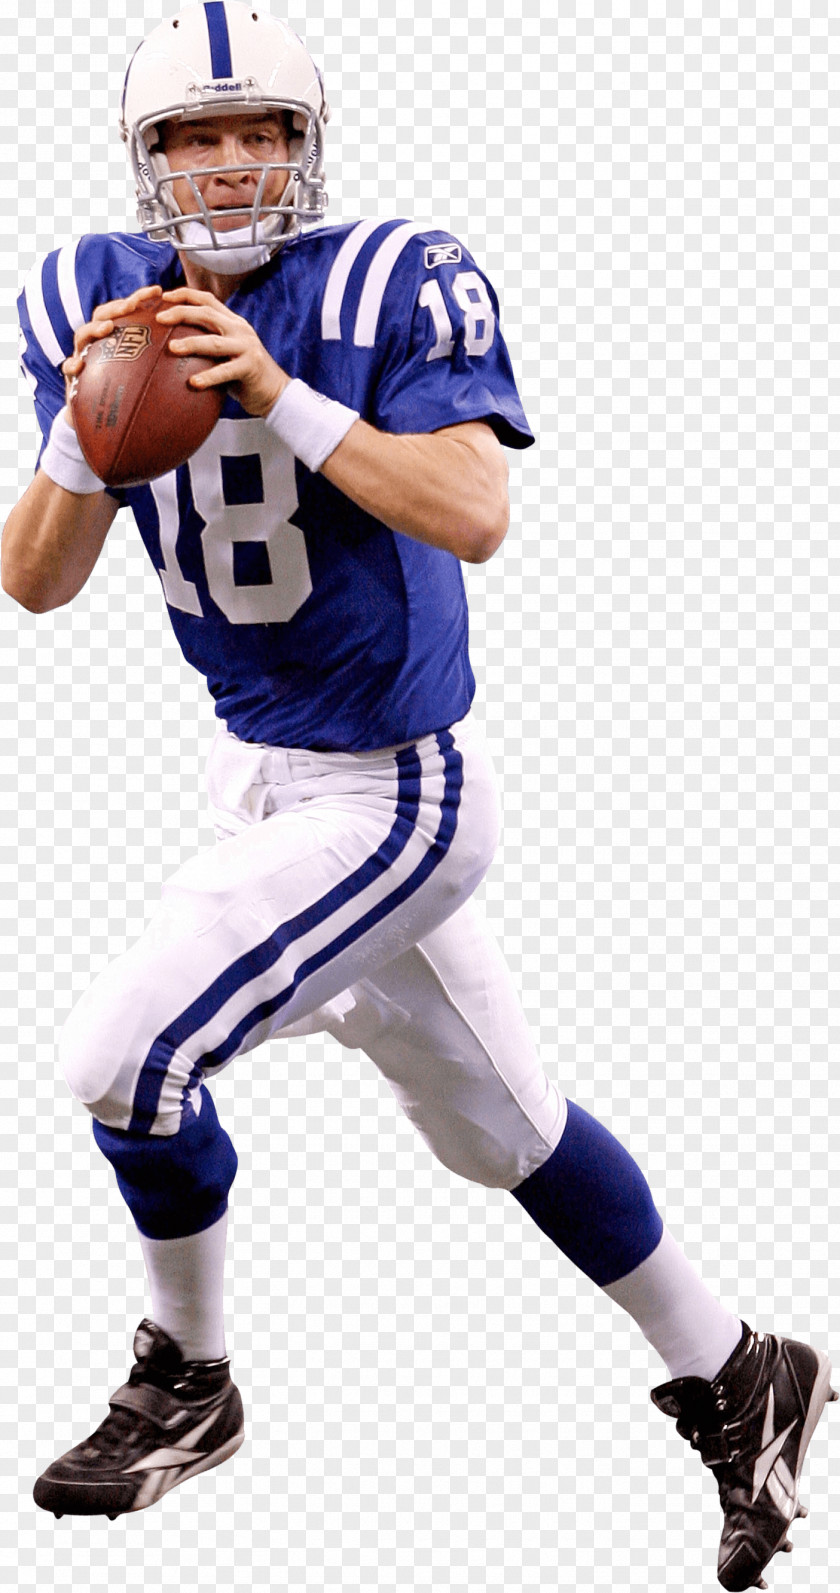 American Football Player New York Giants Indianapolis Colts Helmet Peyton Manning PNG